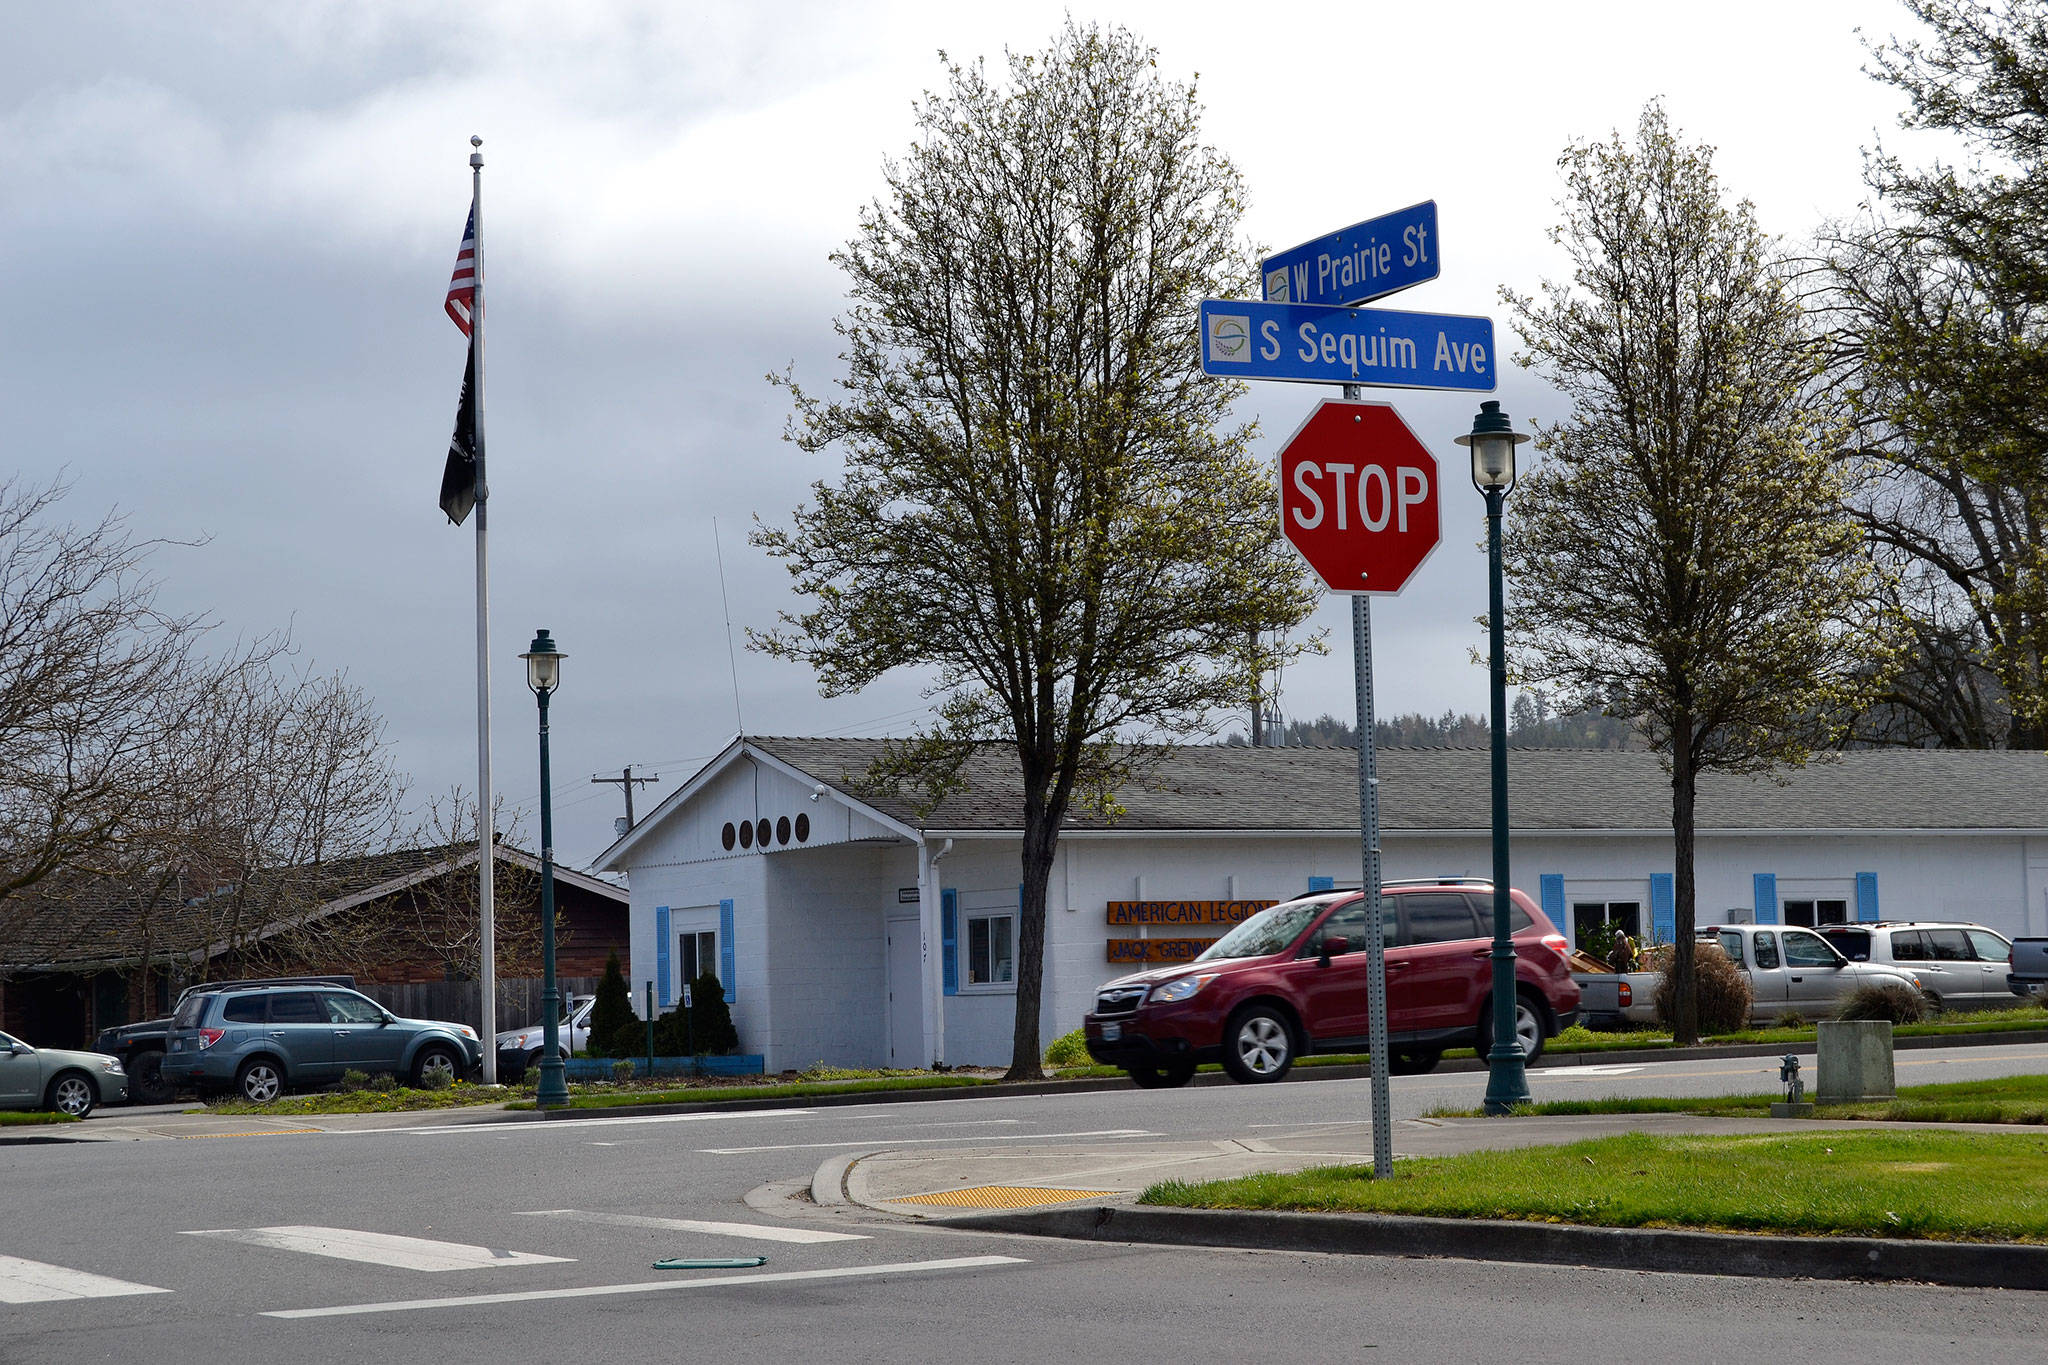 City of Sequim staff look to improve Prairie Street in the coming years to better connect possible industrial areas and to relieve congestion off Washington Street. One possibility could be a traffic signal at the South Sequim Avenue/Washington Street intersection to better control traffic flow, city staff said. Sequim Gazette photo by Matthew Nash